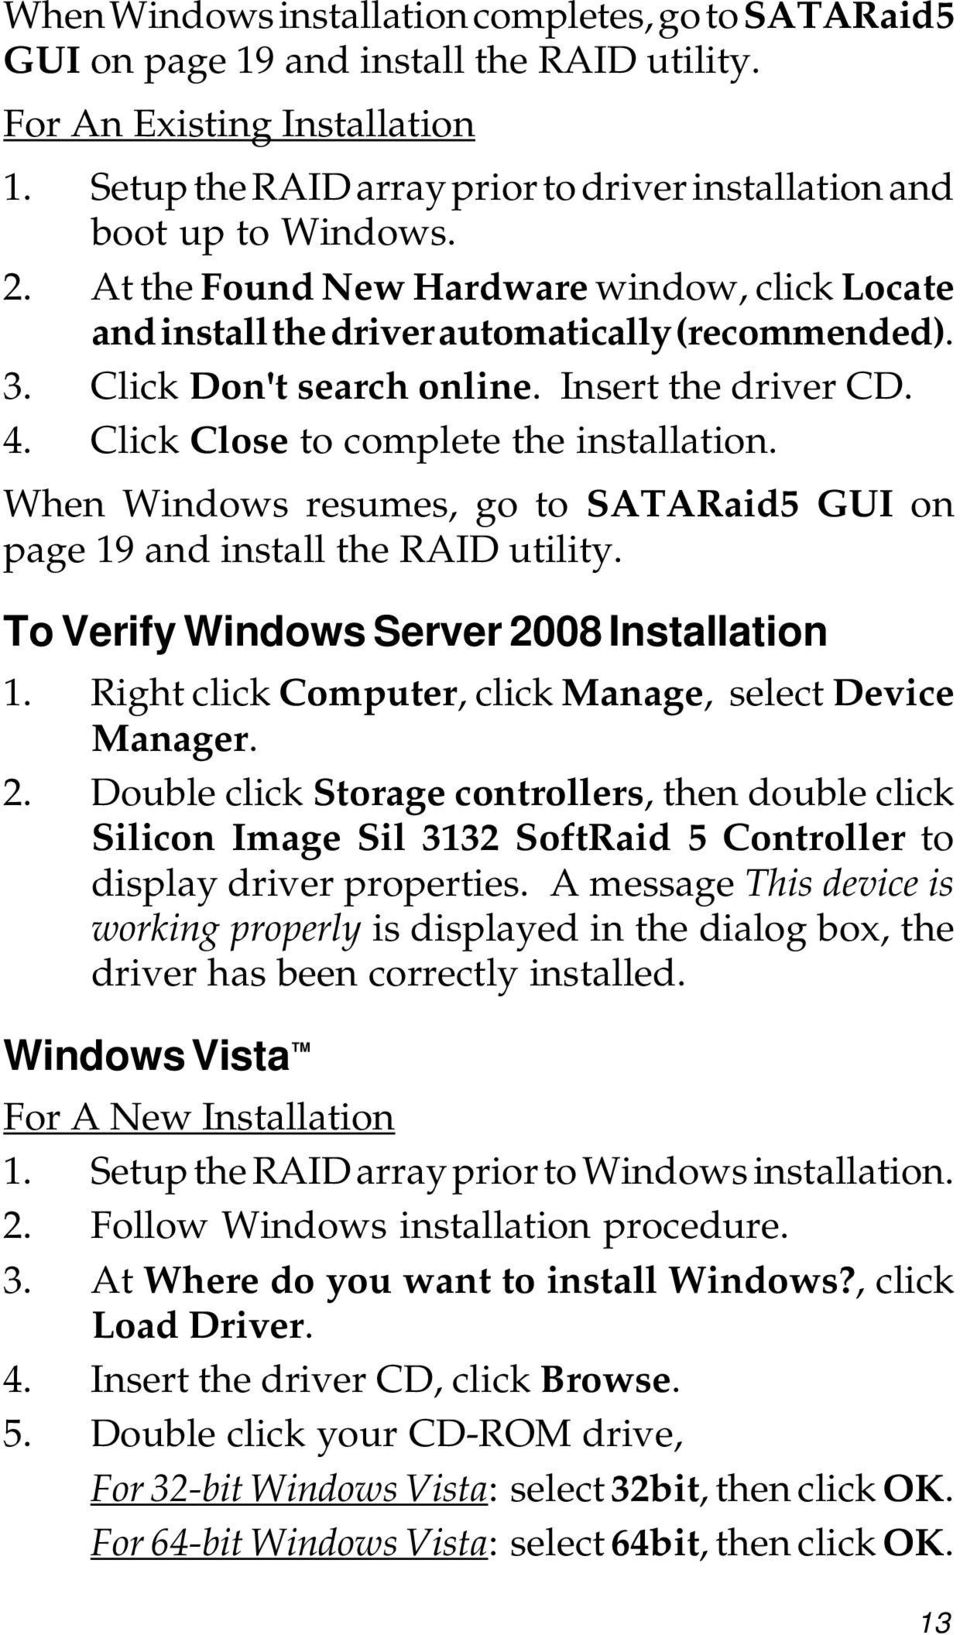 Click Don't search online. Insert the driver CD. 4. Click Close to complete the installation. When Windows resumes, go to SATARaid5 GUI on page 19 and install the RAID utility.